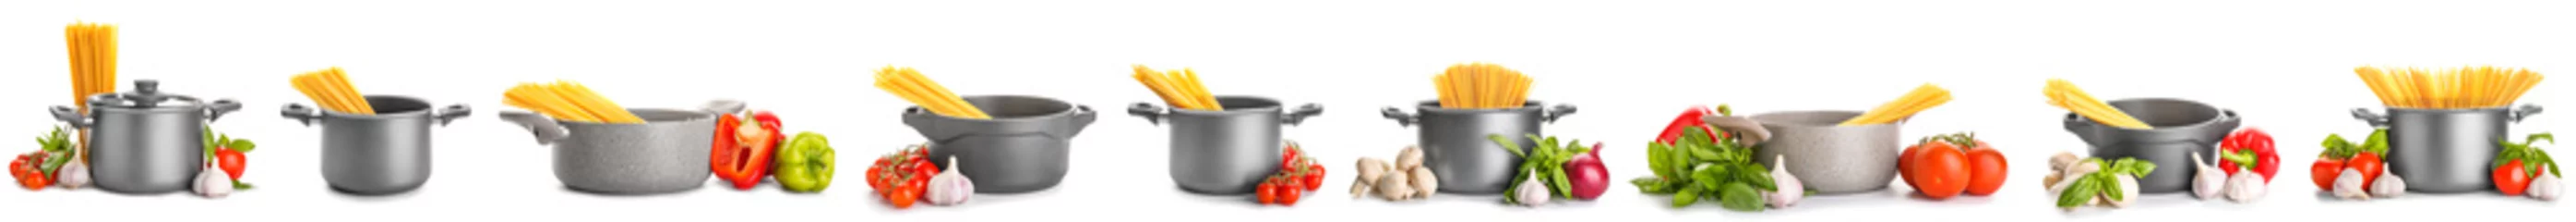 Papier peint photo autocollant rond Légumes frais Collage of cooking pots with raw pasta and vegetables on white background